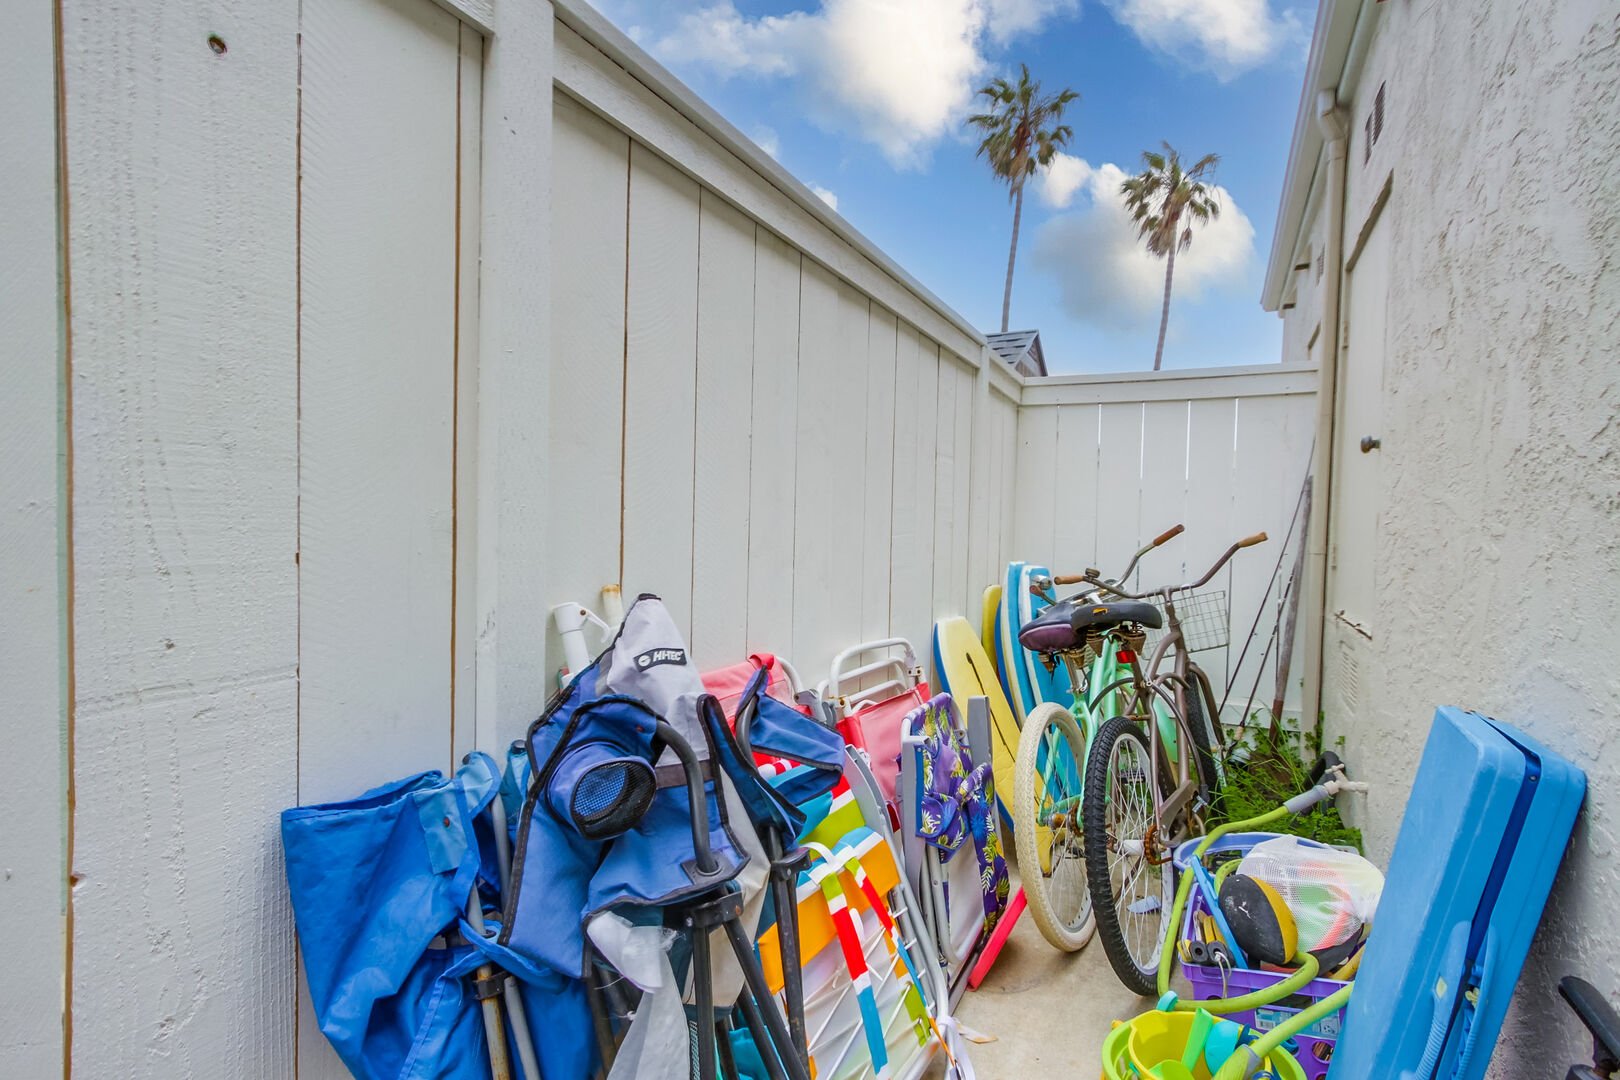 Bikes and beach accessories including boogie boards, beach chairs, sand toys, beach umbrella, etc